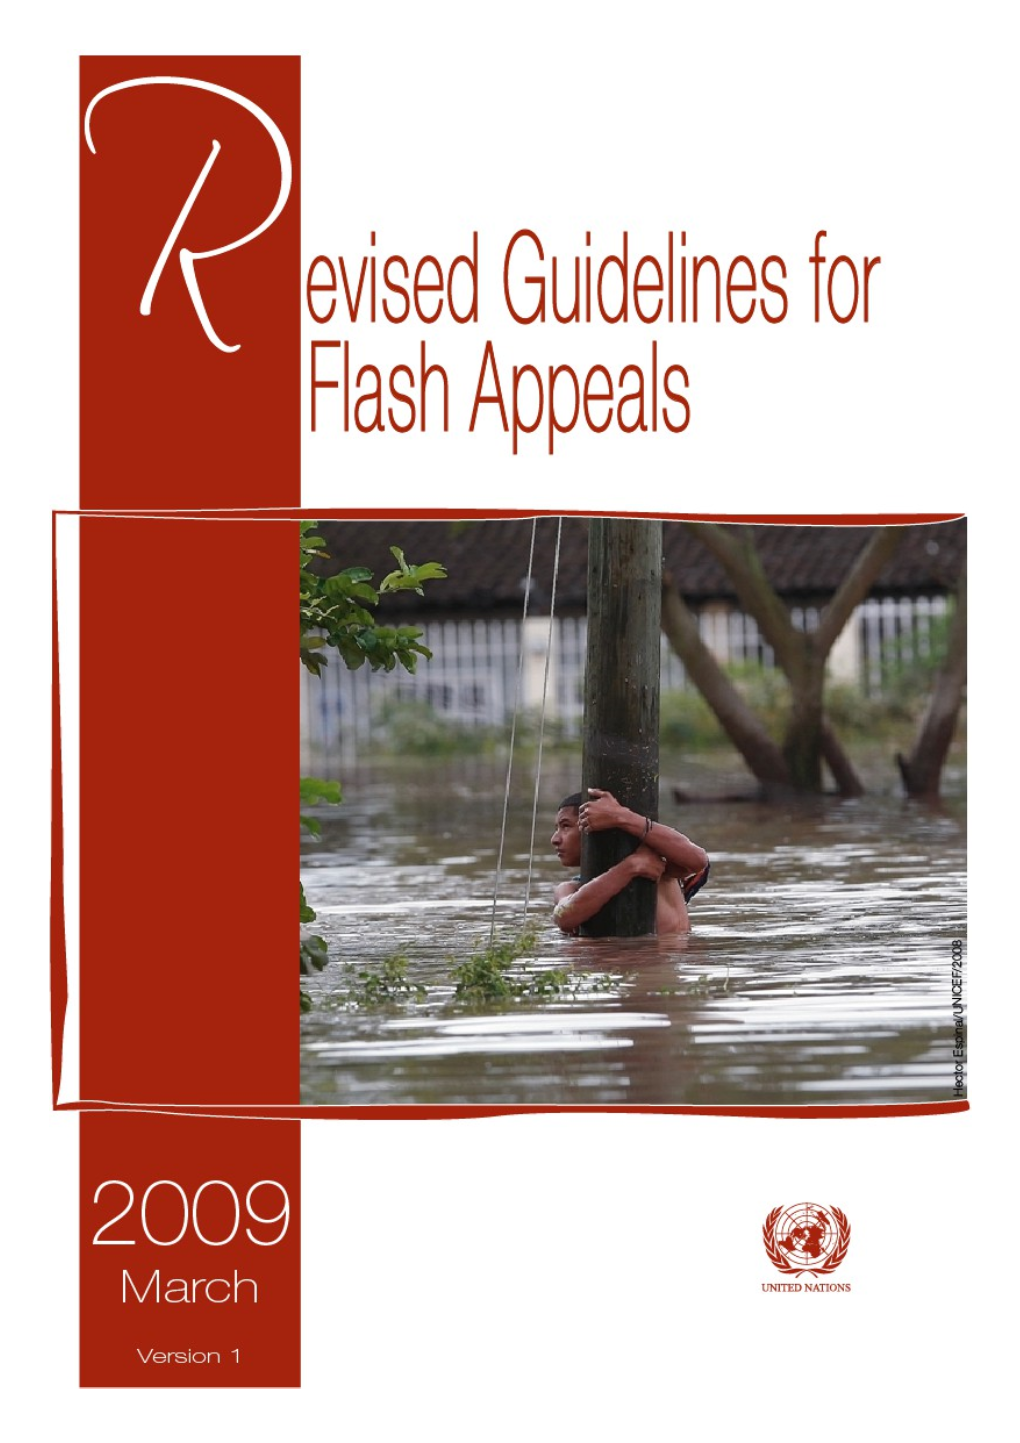 Microsoft Word - MASTER COPY Final Revised Flash Appeal Guidelines Oct 200605